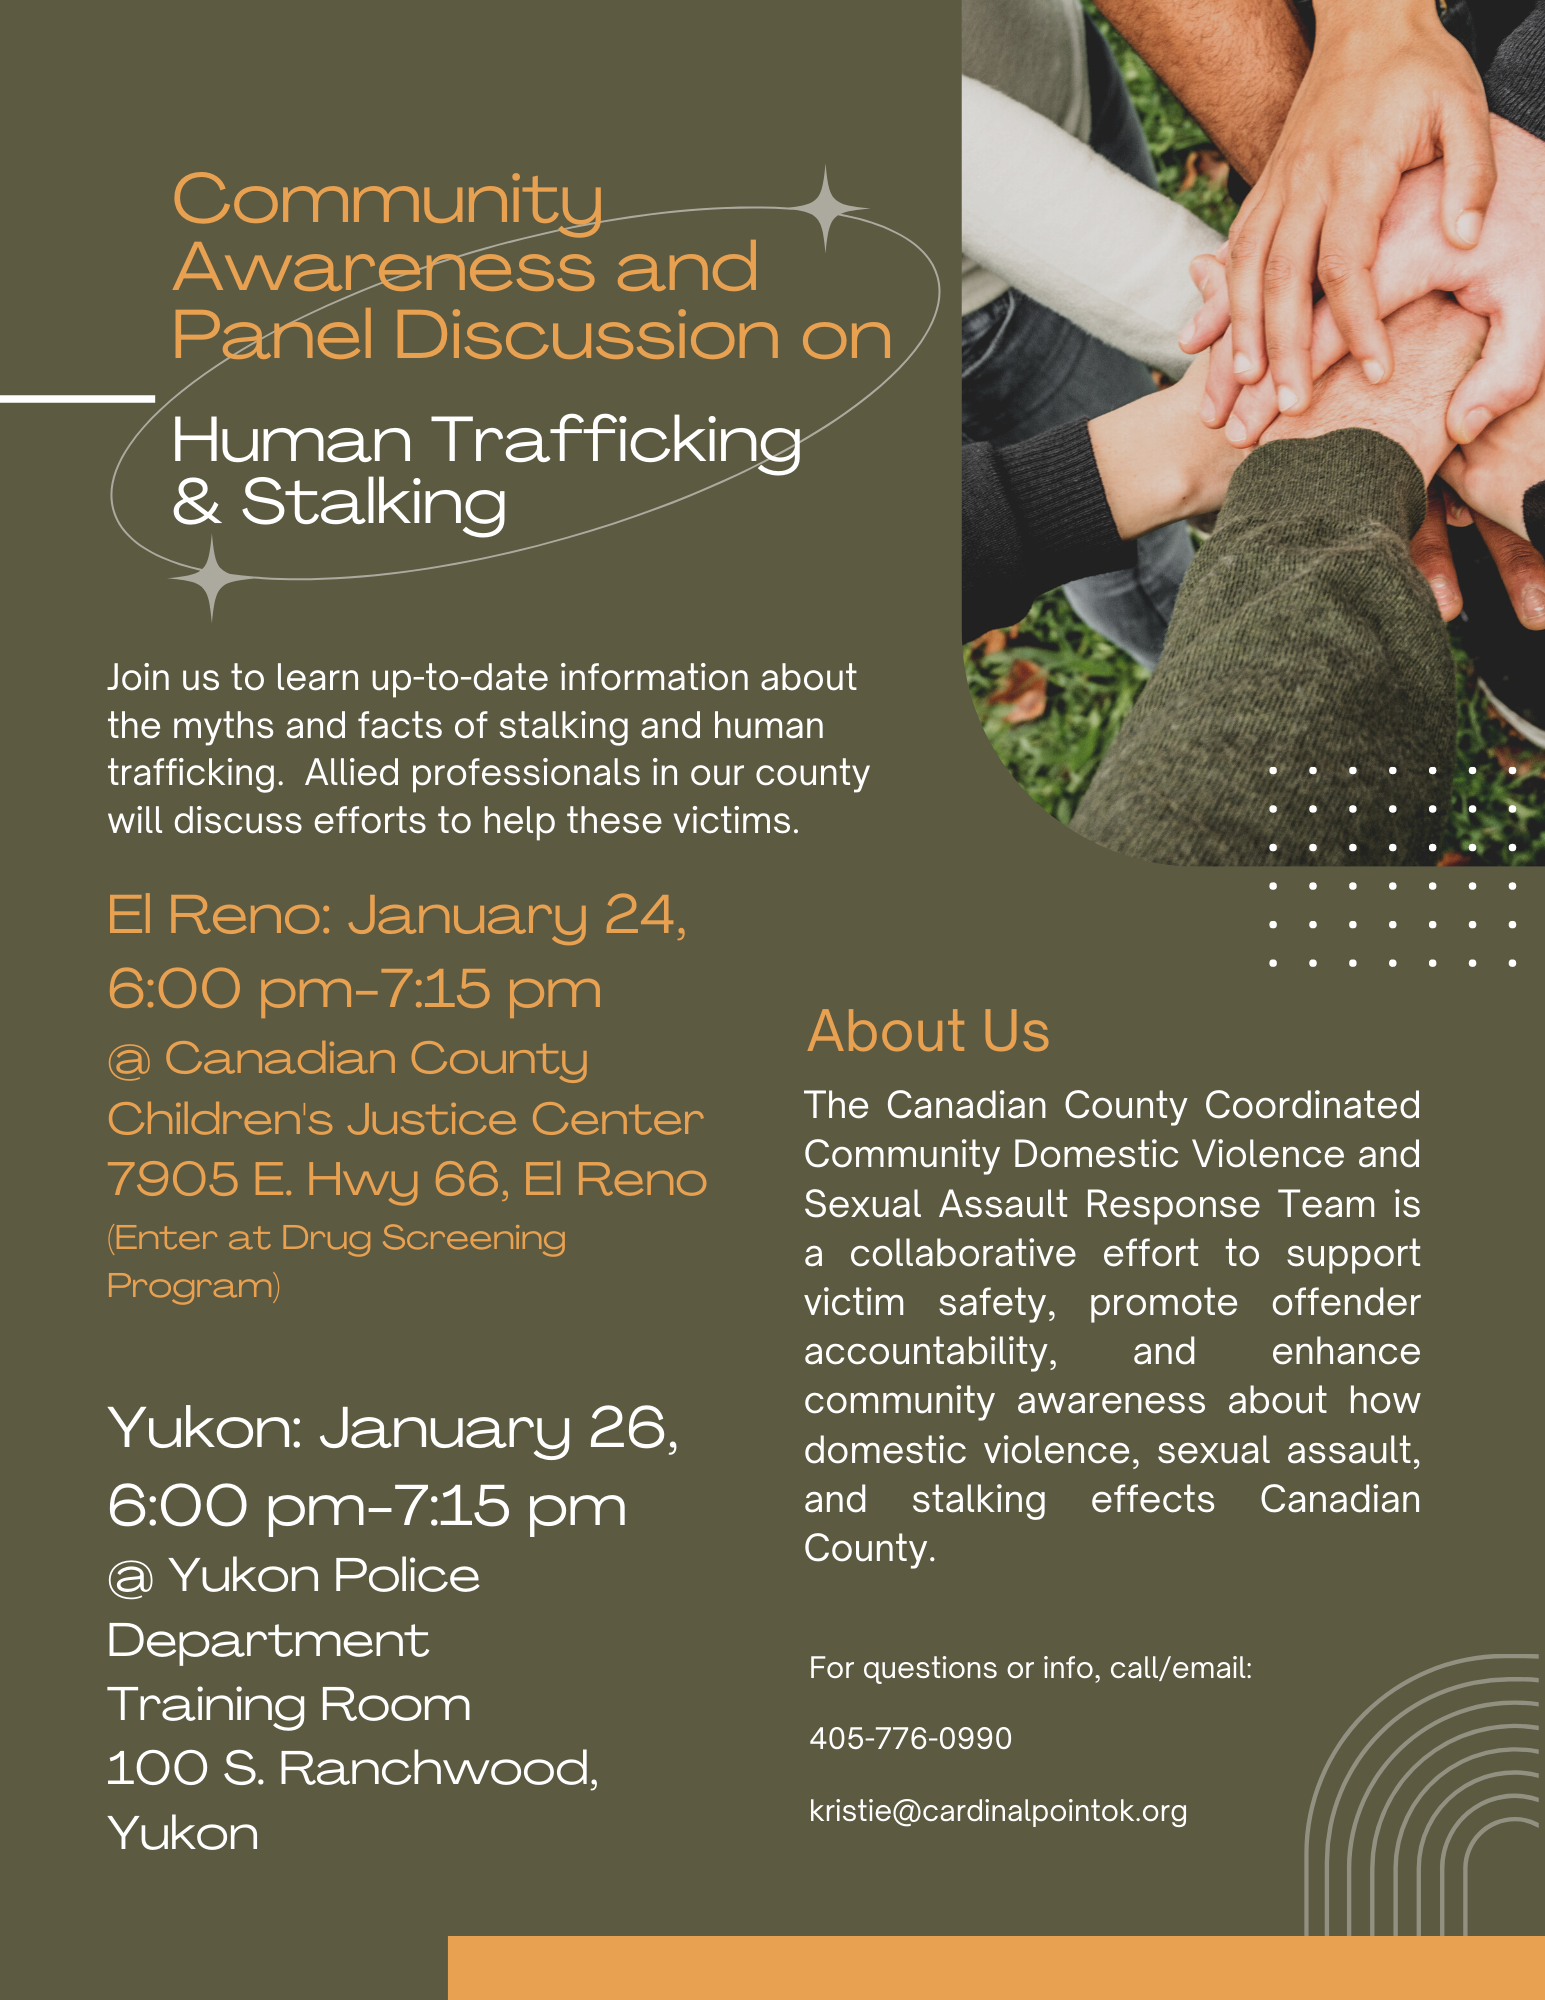 Community Awareness and Panel Discussion on Human Trafficking & Stalking